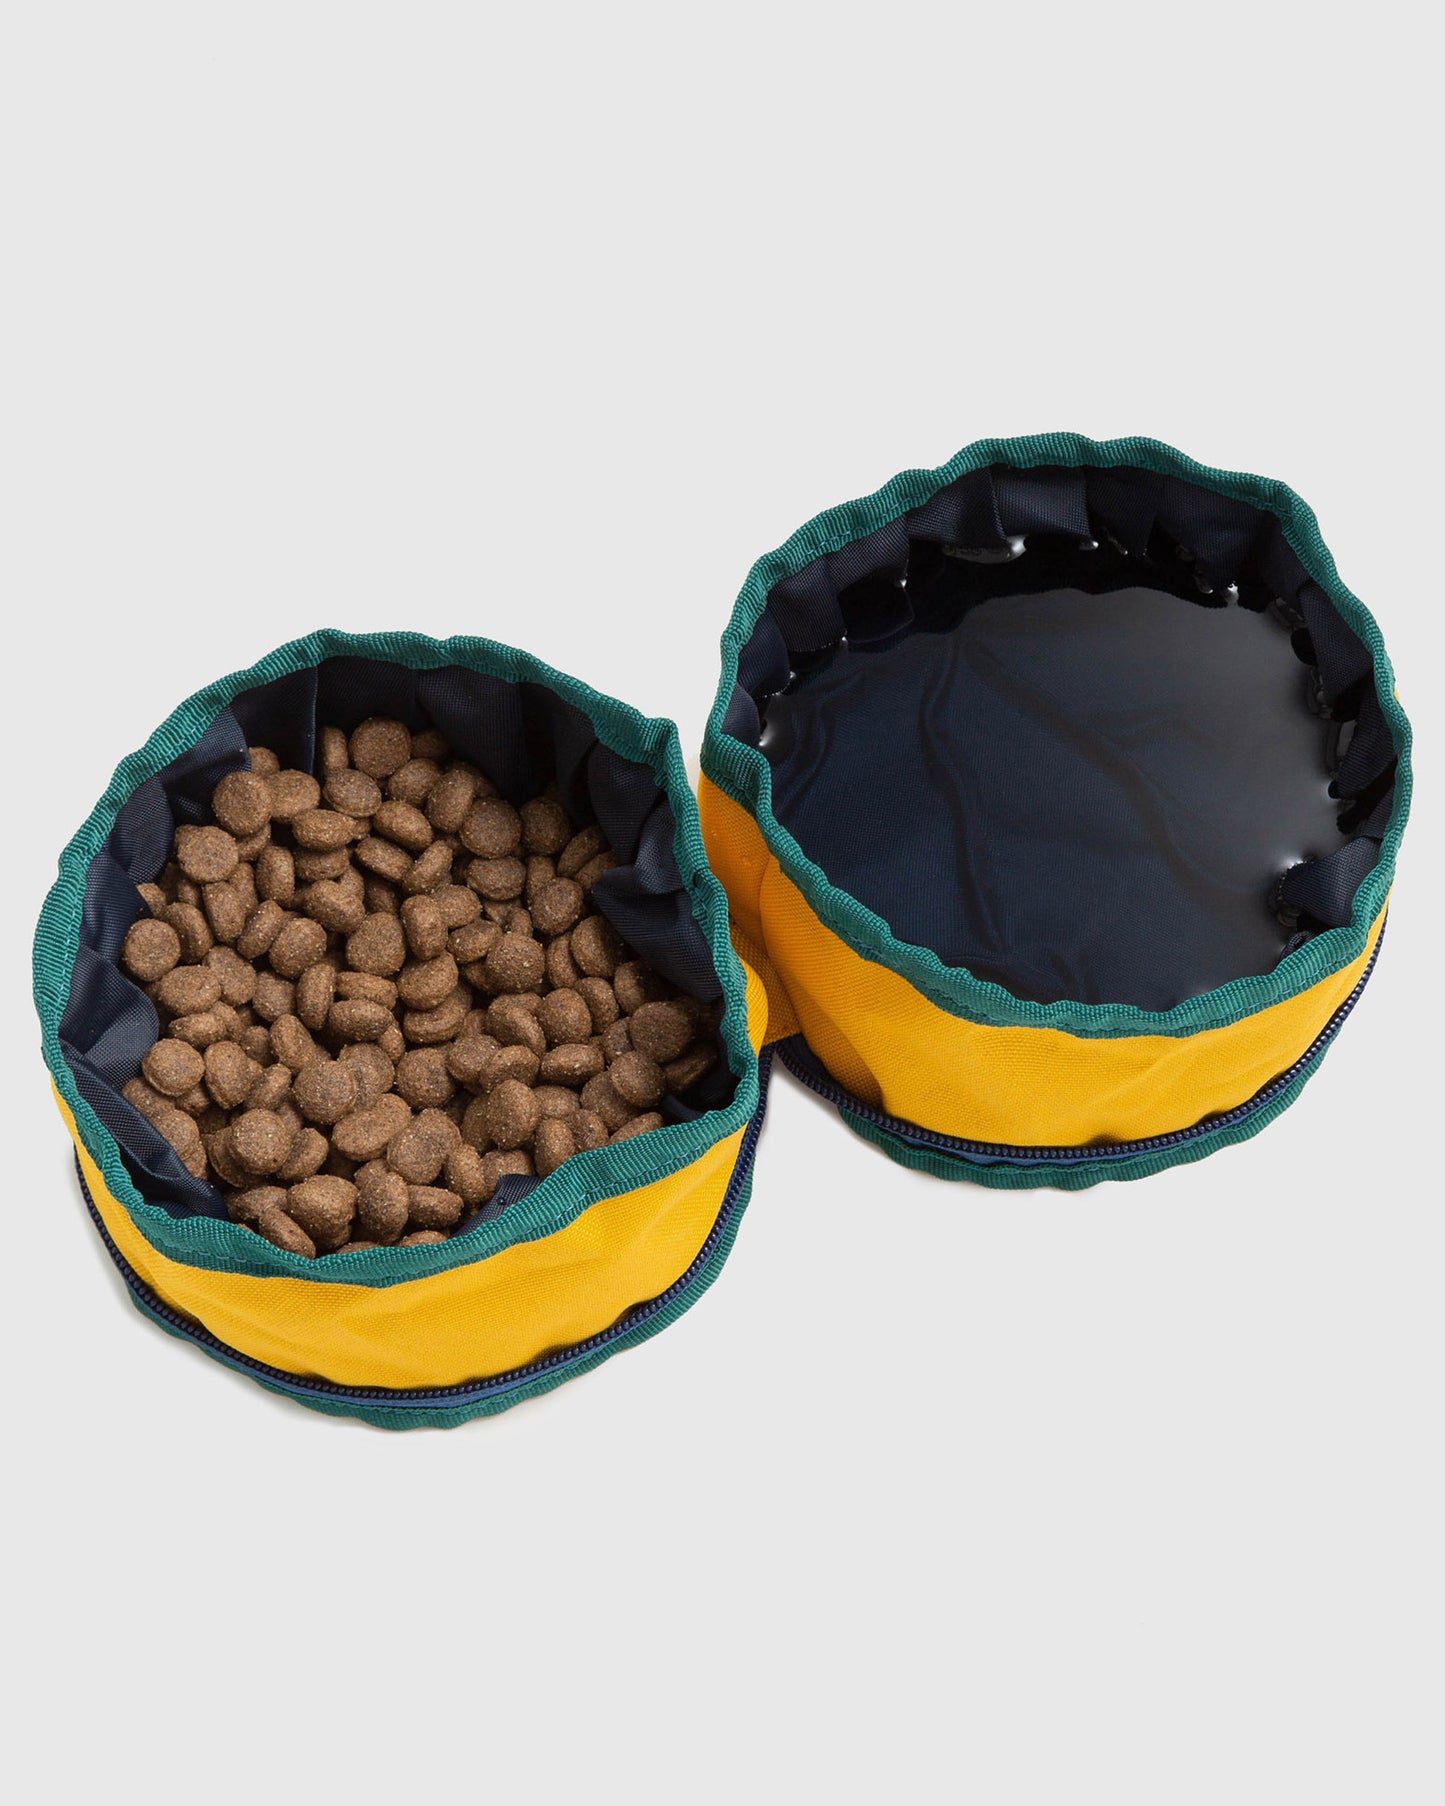 The Ultimutt Guide to Zero Waste Dog Food and Water Bowls